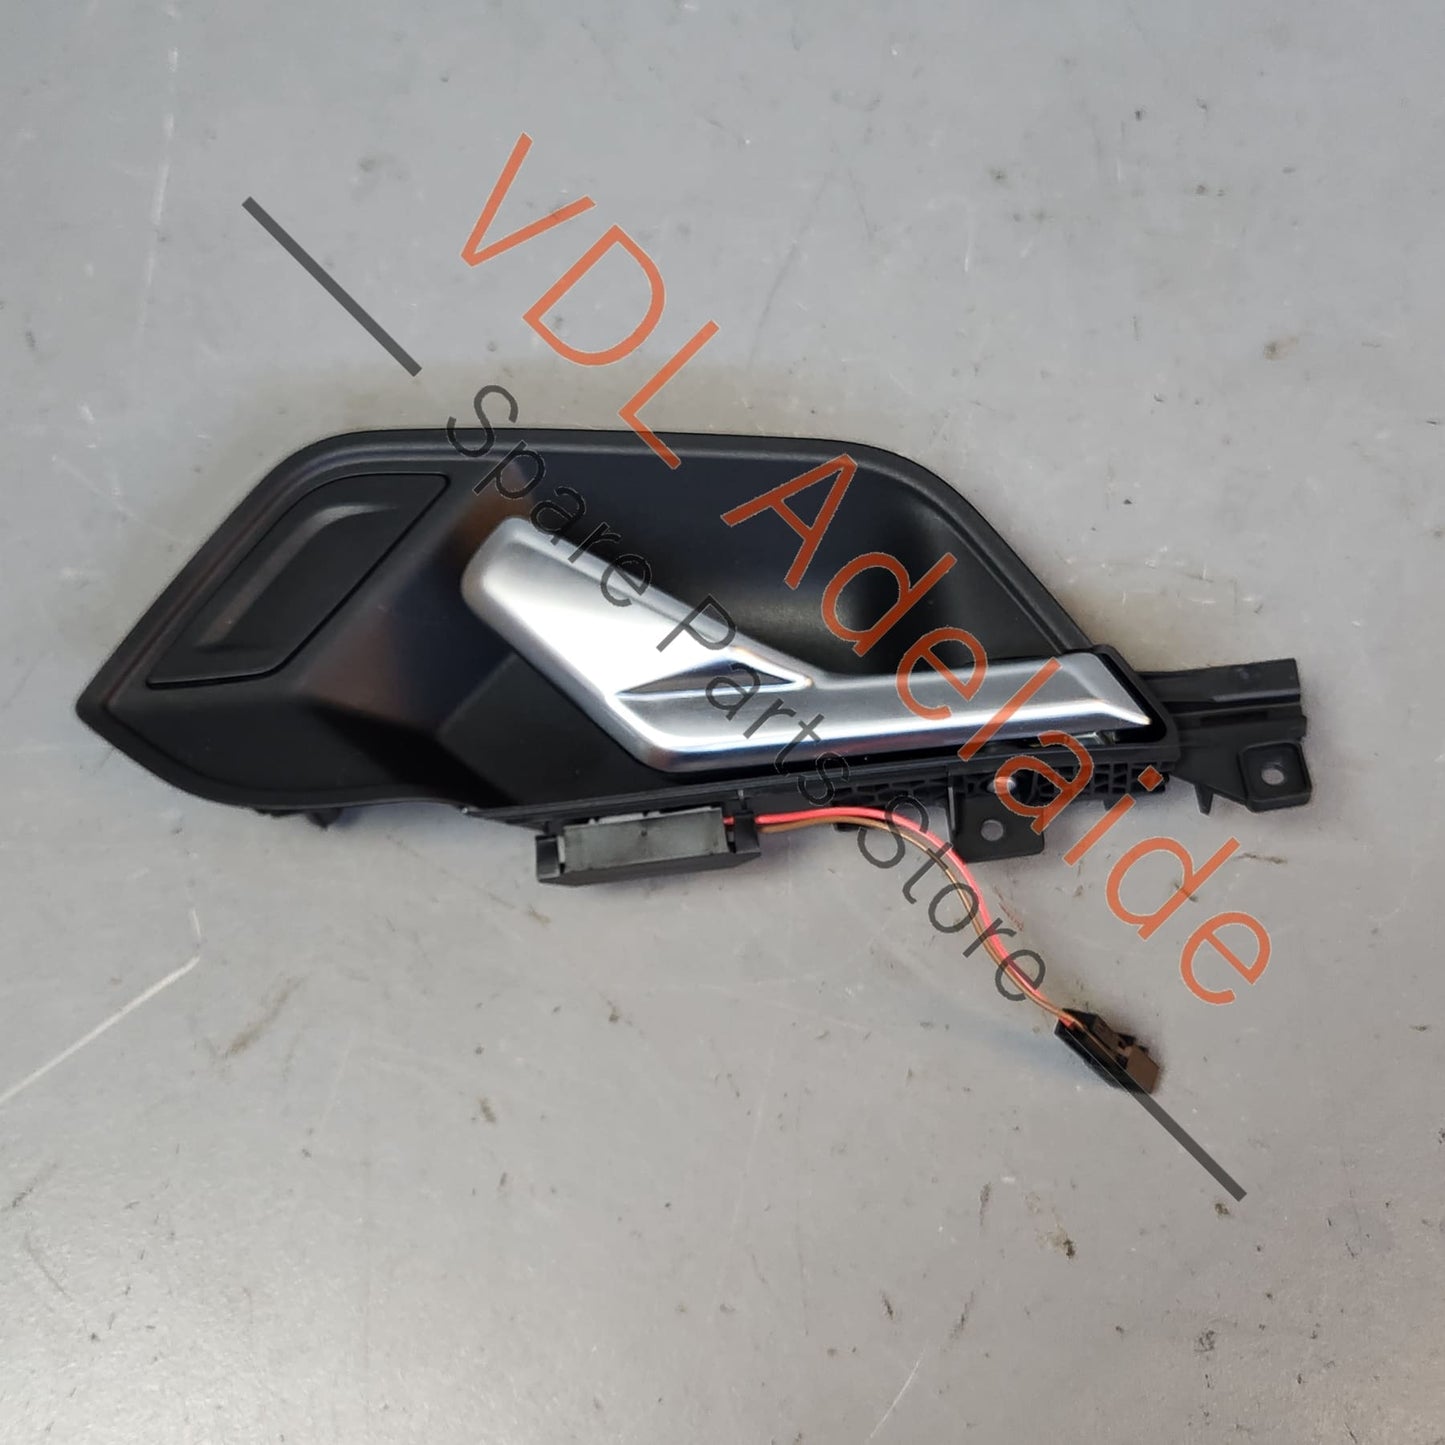 83A837019G 83A837019G4PK 83A837019F  Audi Q3 RSQ3 F3 Left Side Interior Door Pull Release Handle 83A837019G 4PK